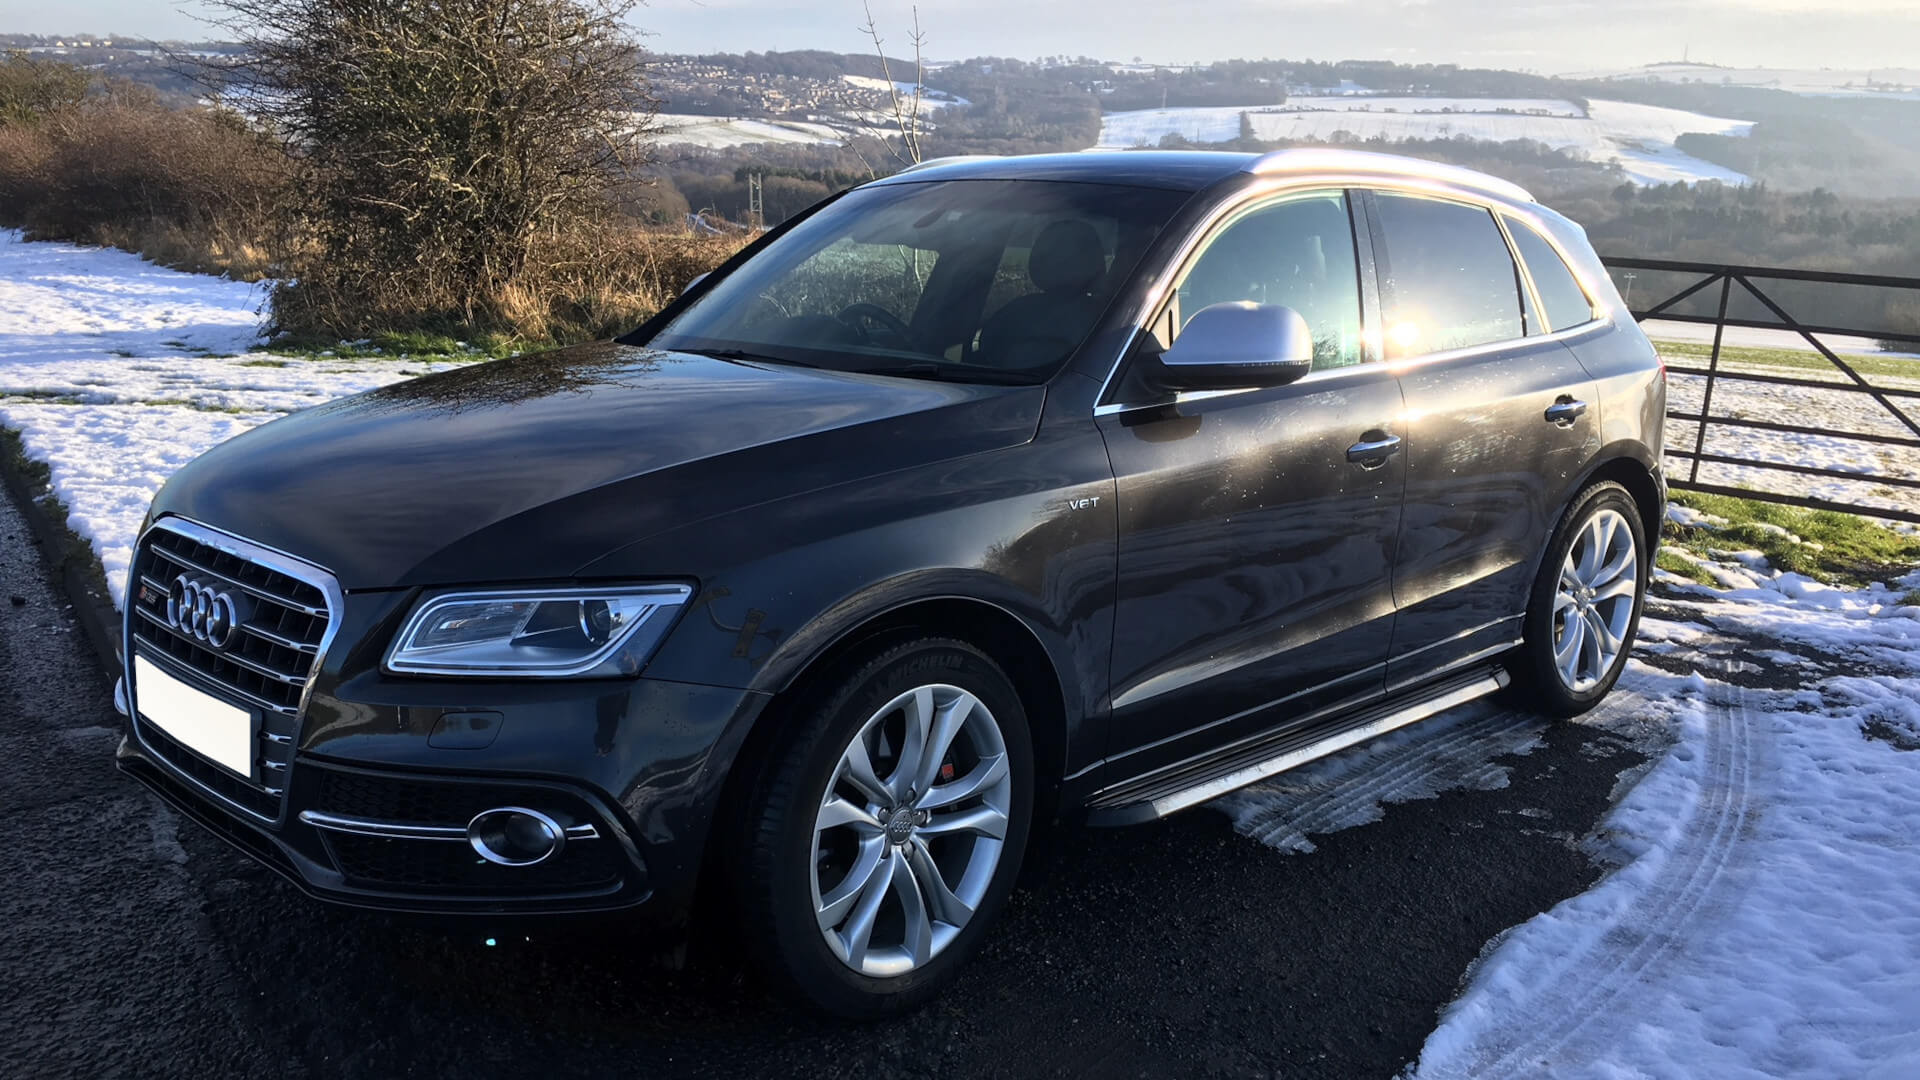 Direct4x4 Accessories for Audi Q5 Vehicles